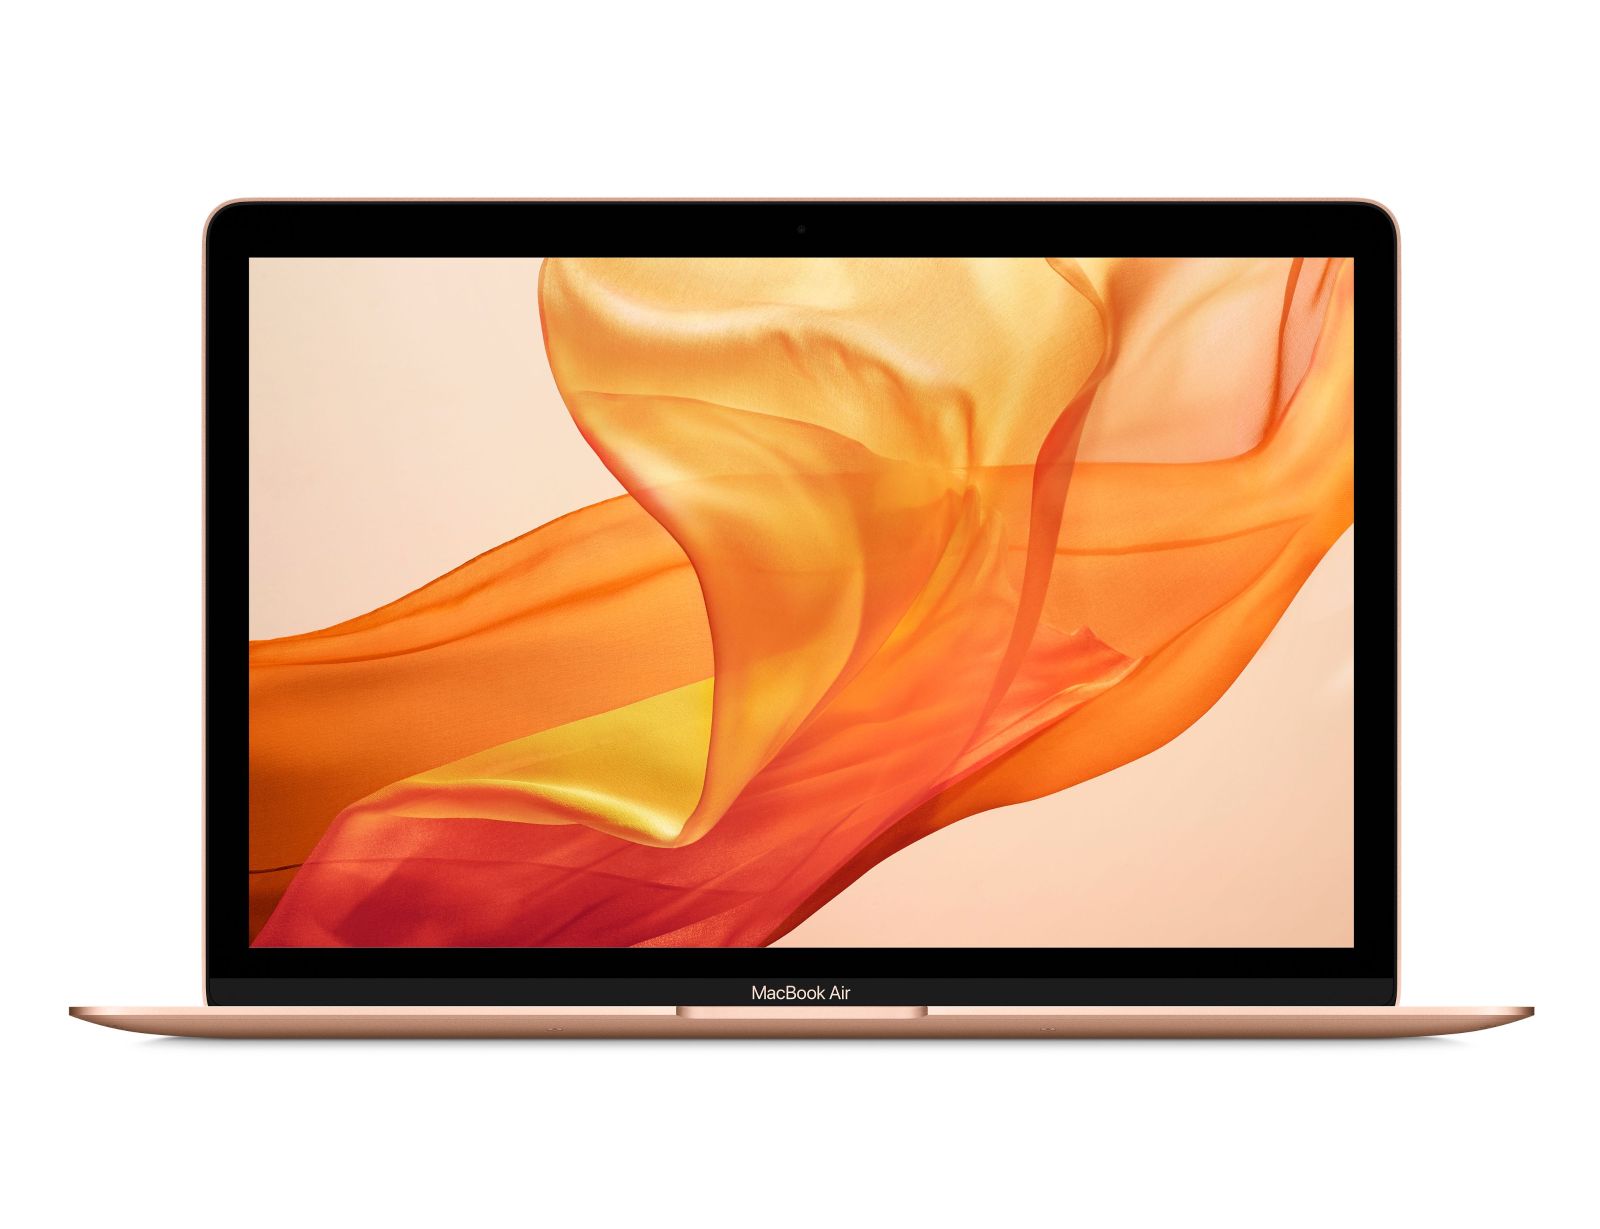 MacBook Air (Retina, 13-inch, 2018) - Technical Specifications (UK)